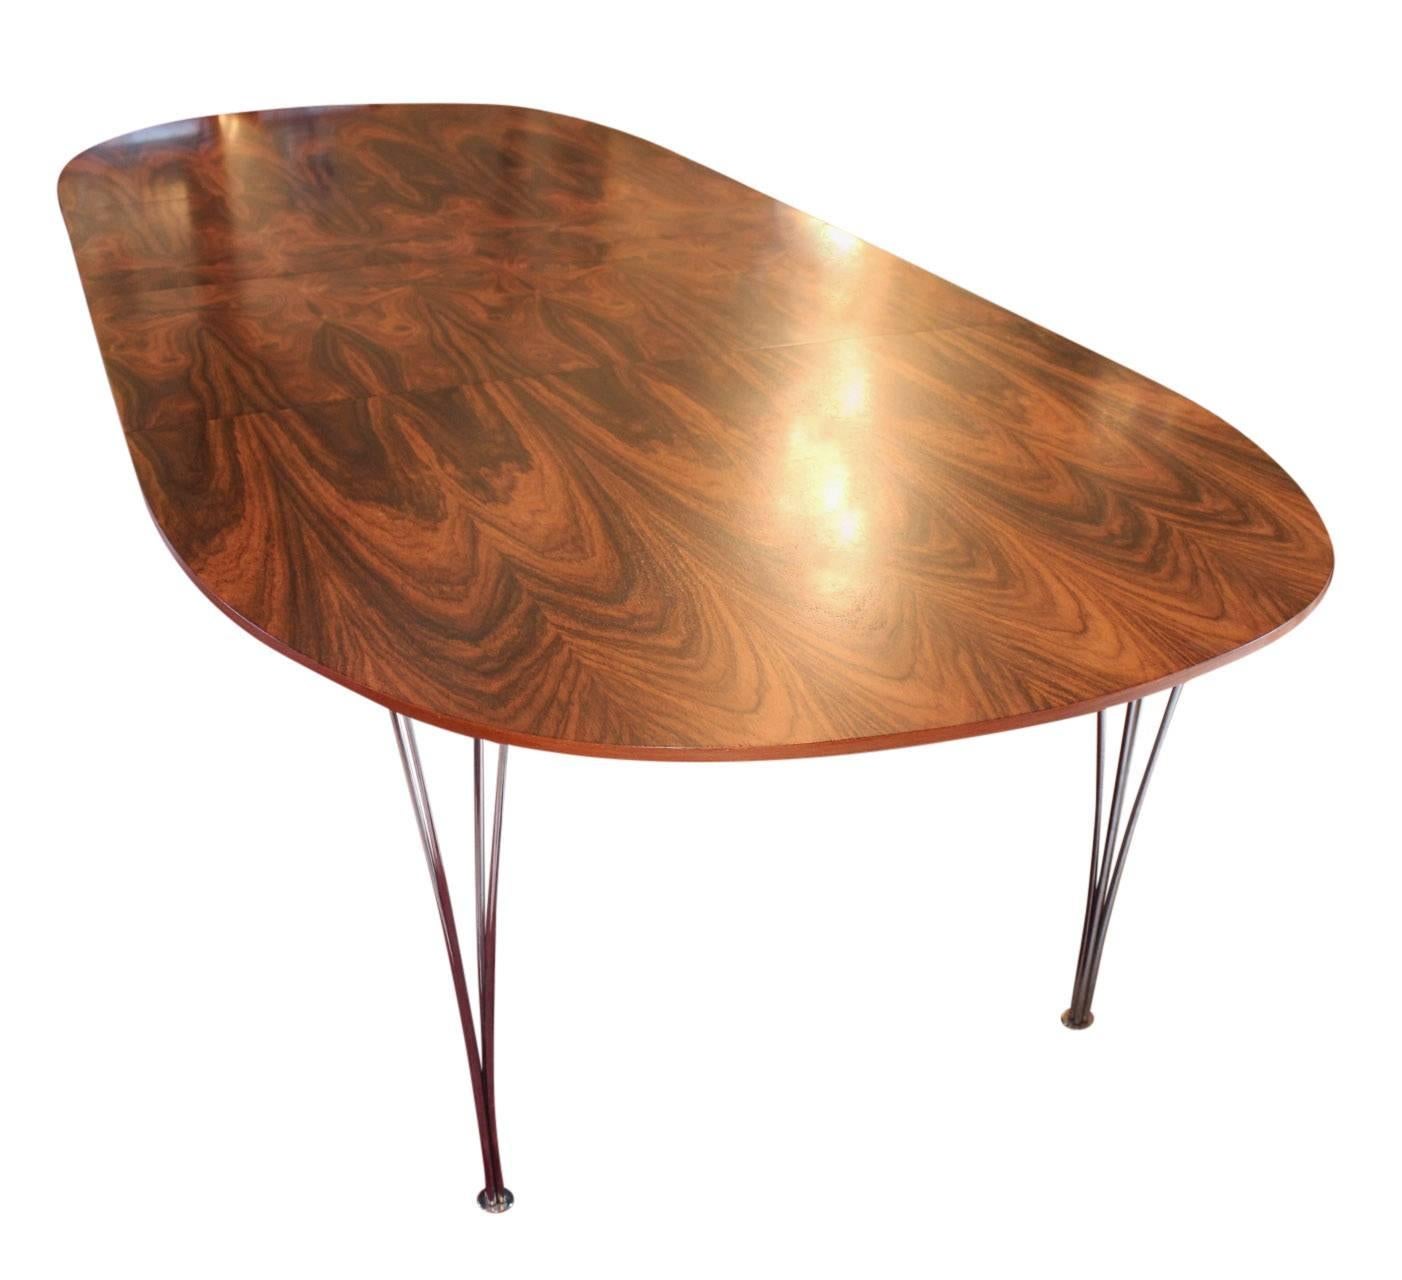 Super Ellipse table with extension leaves in rosewood designed by Piet Hein, Arne Jacobsen and Bruno Mathsson in 1968. The table is in great vintage condition and with legs of chrome from the 1970s.